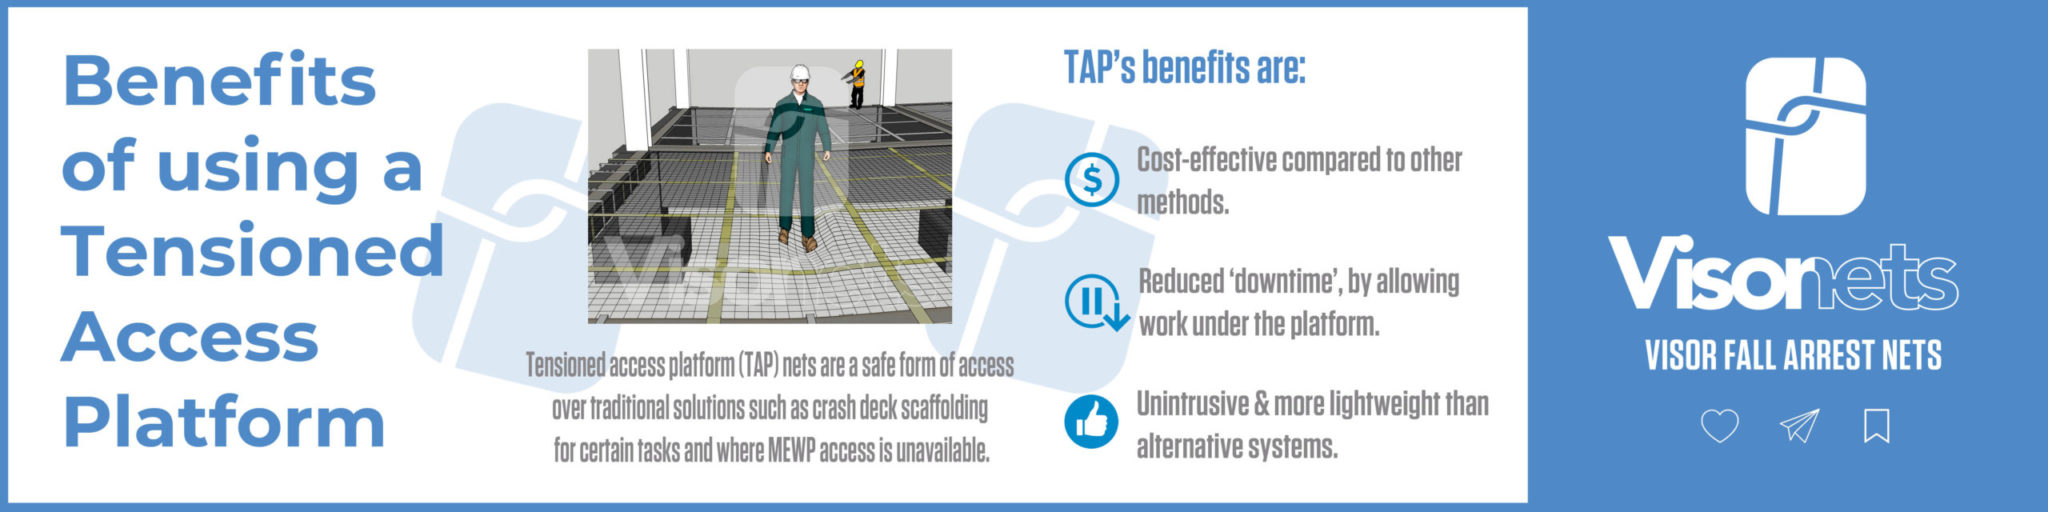 benefits-of-using-tensioned-access-platform